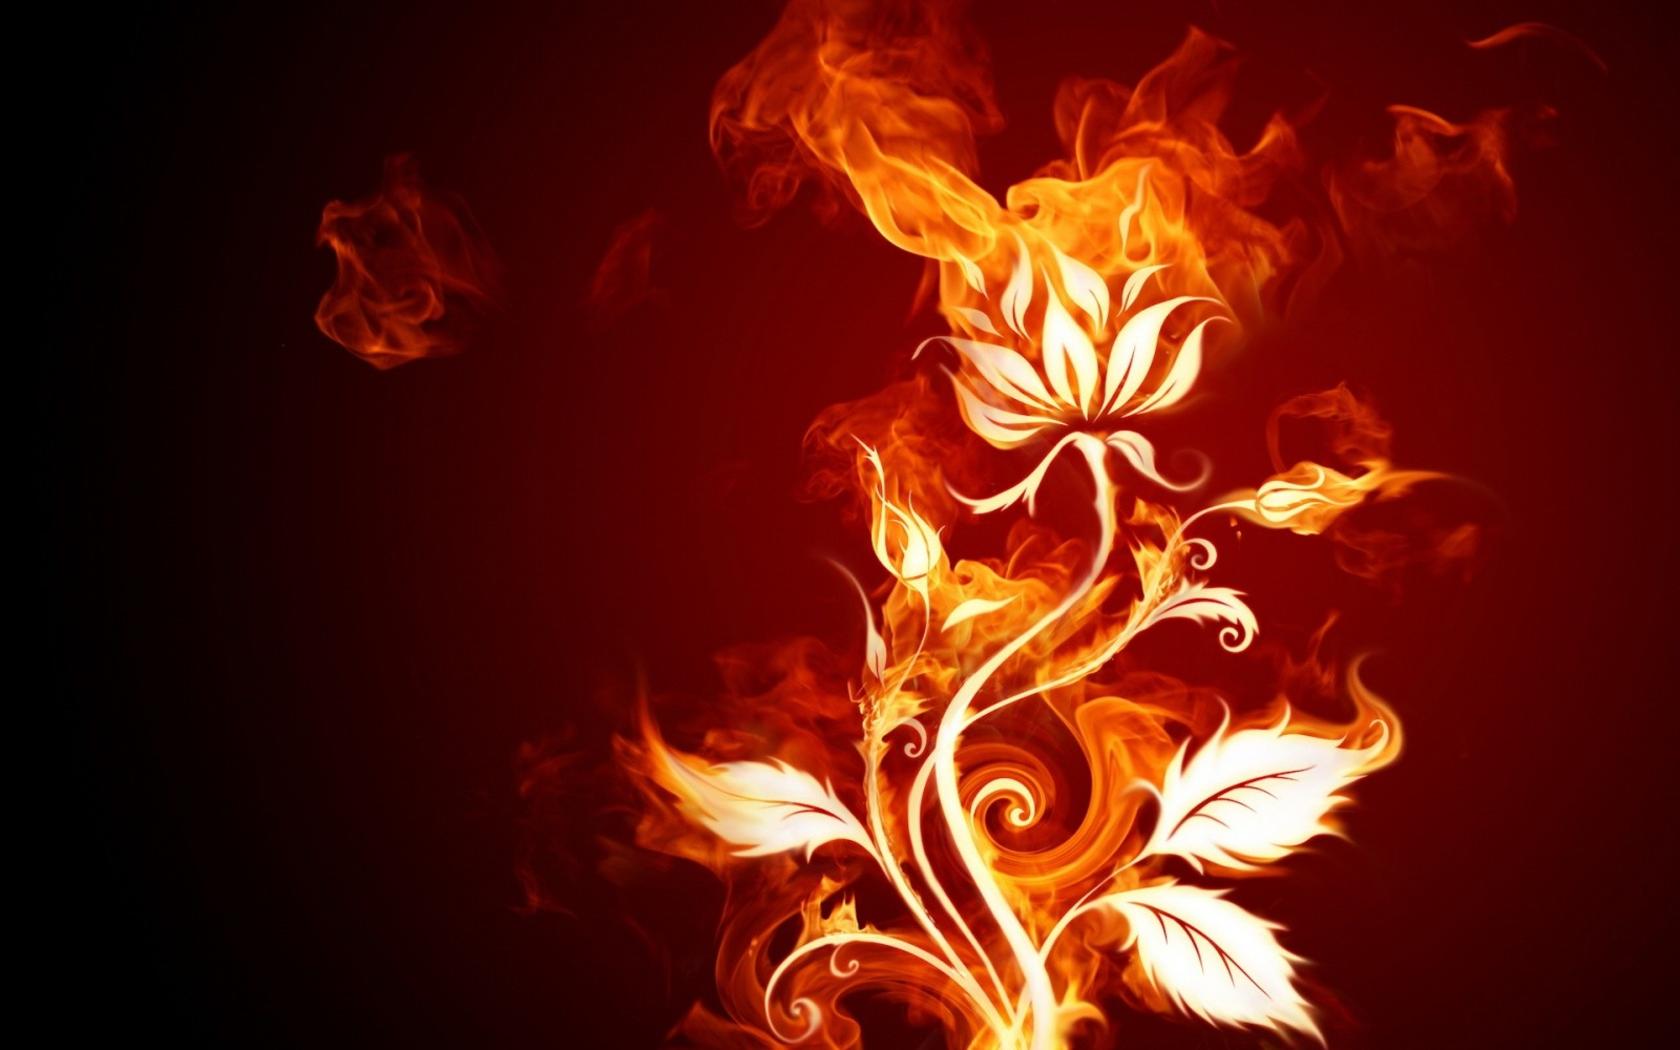 Fire Widescreen hd Wallpapers Only hd wallpapers